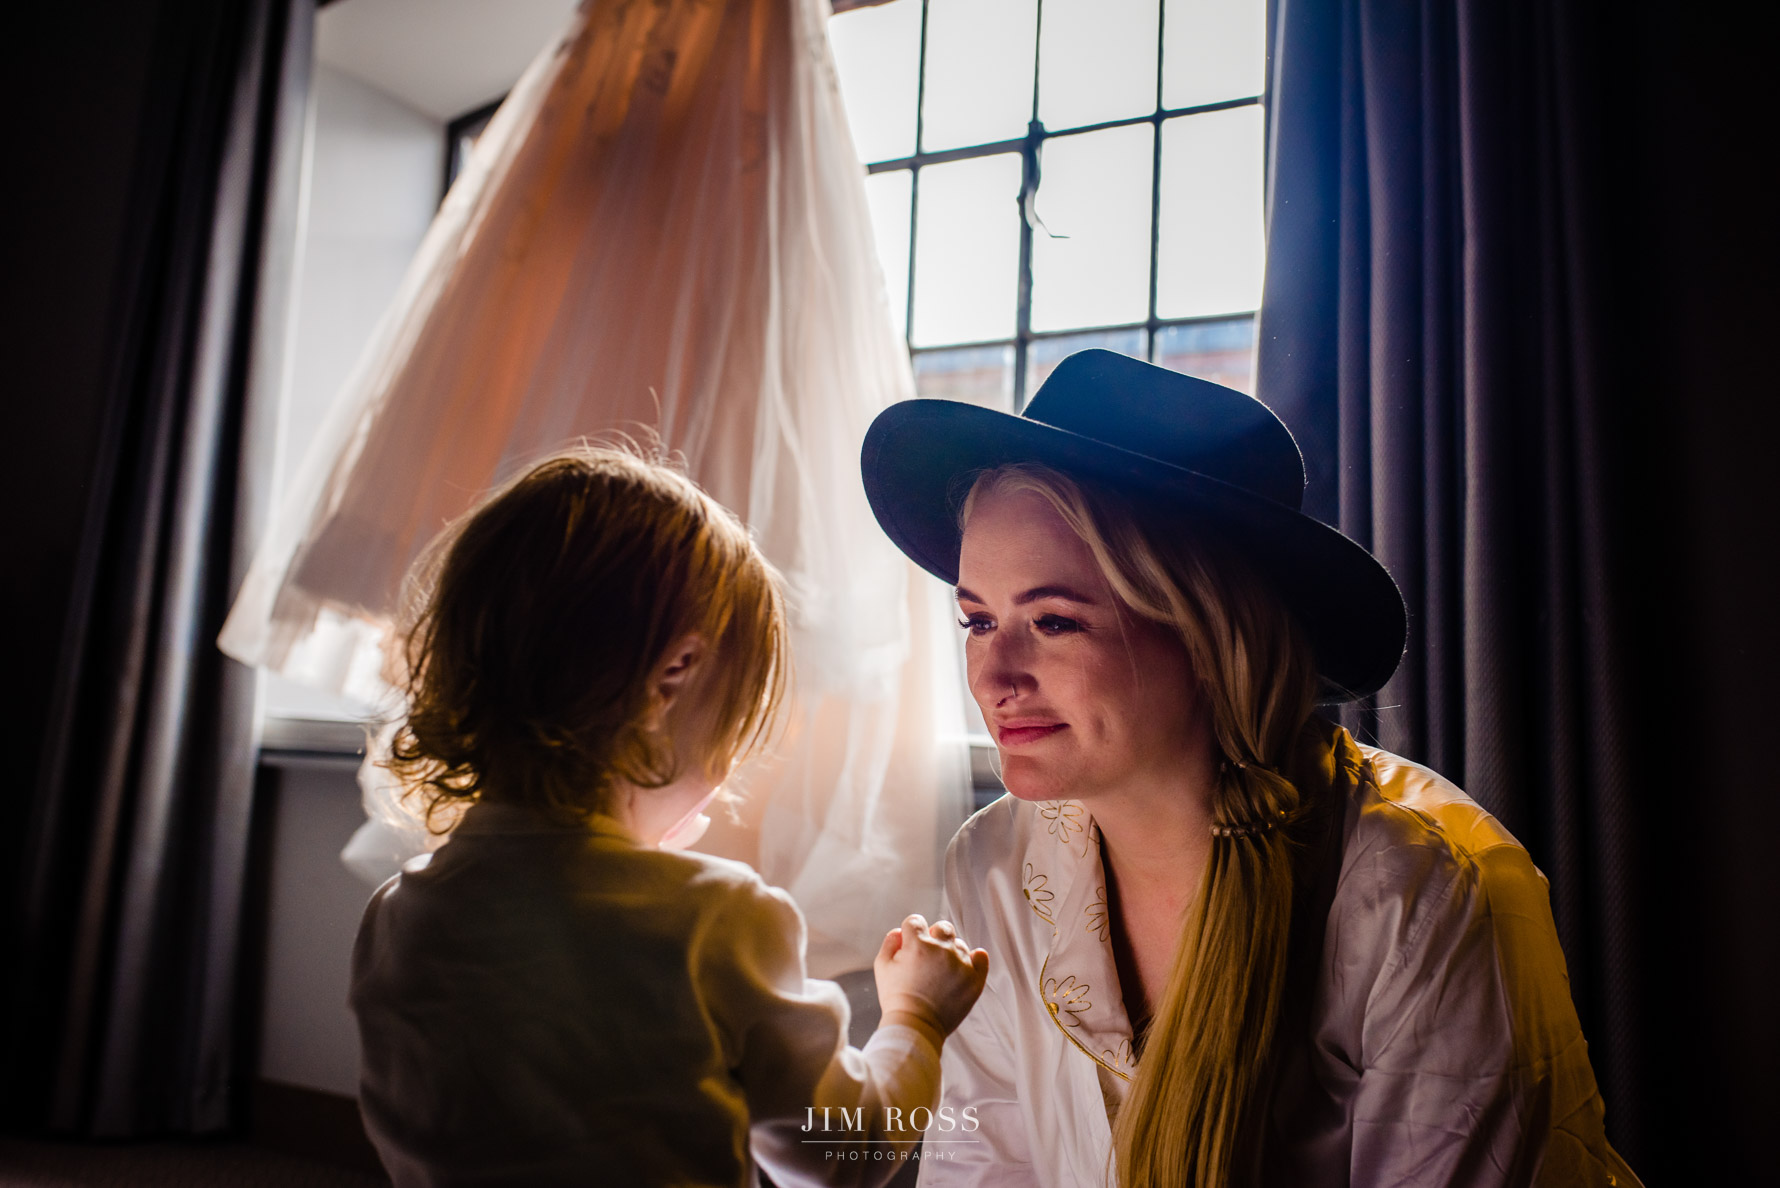 bride with hat and daughter. dress in background